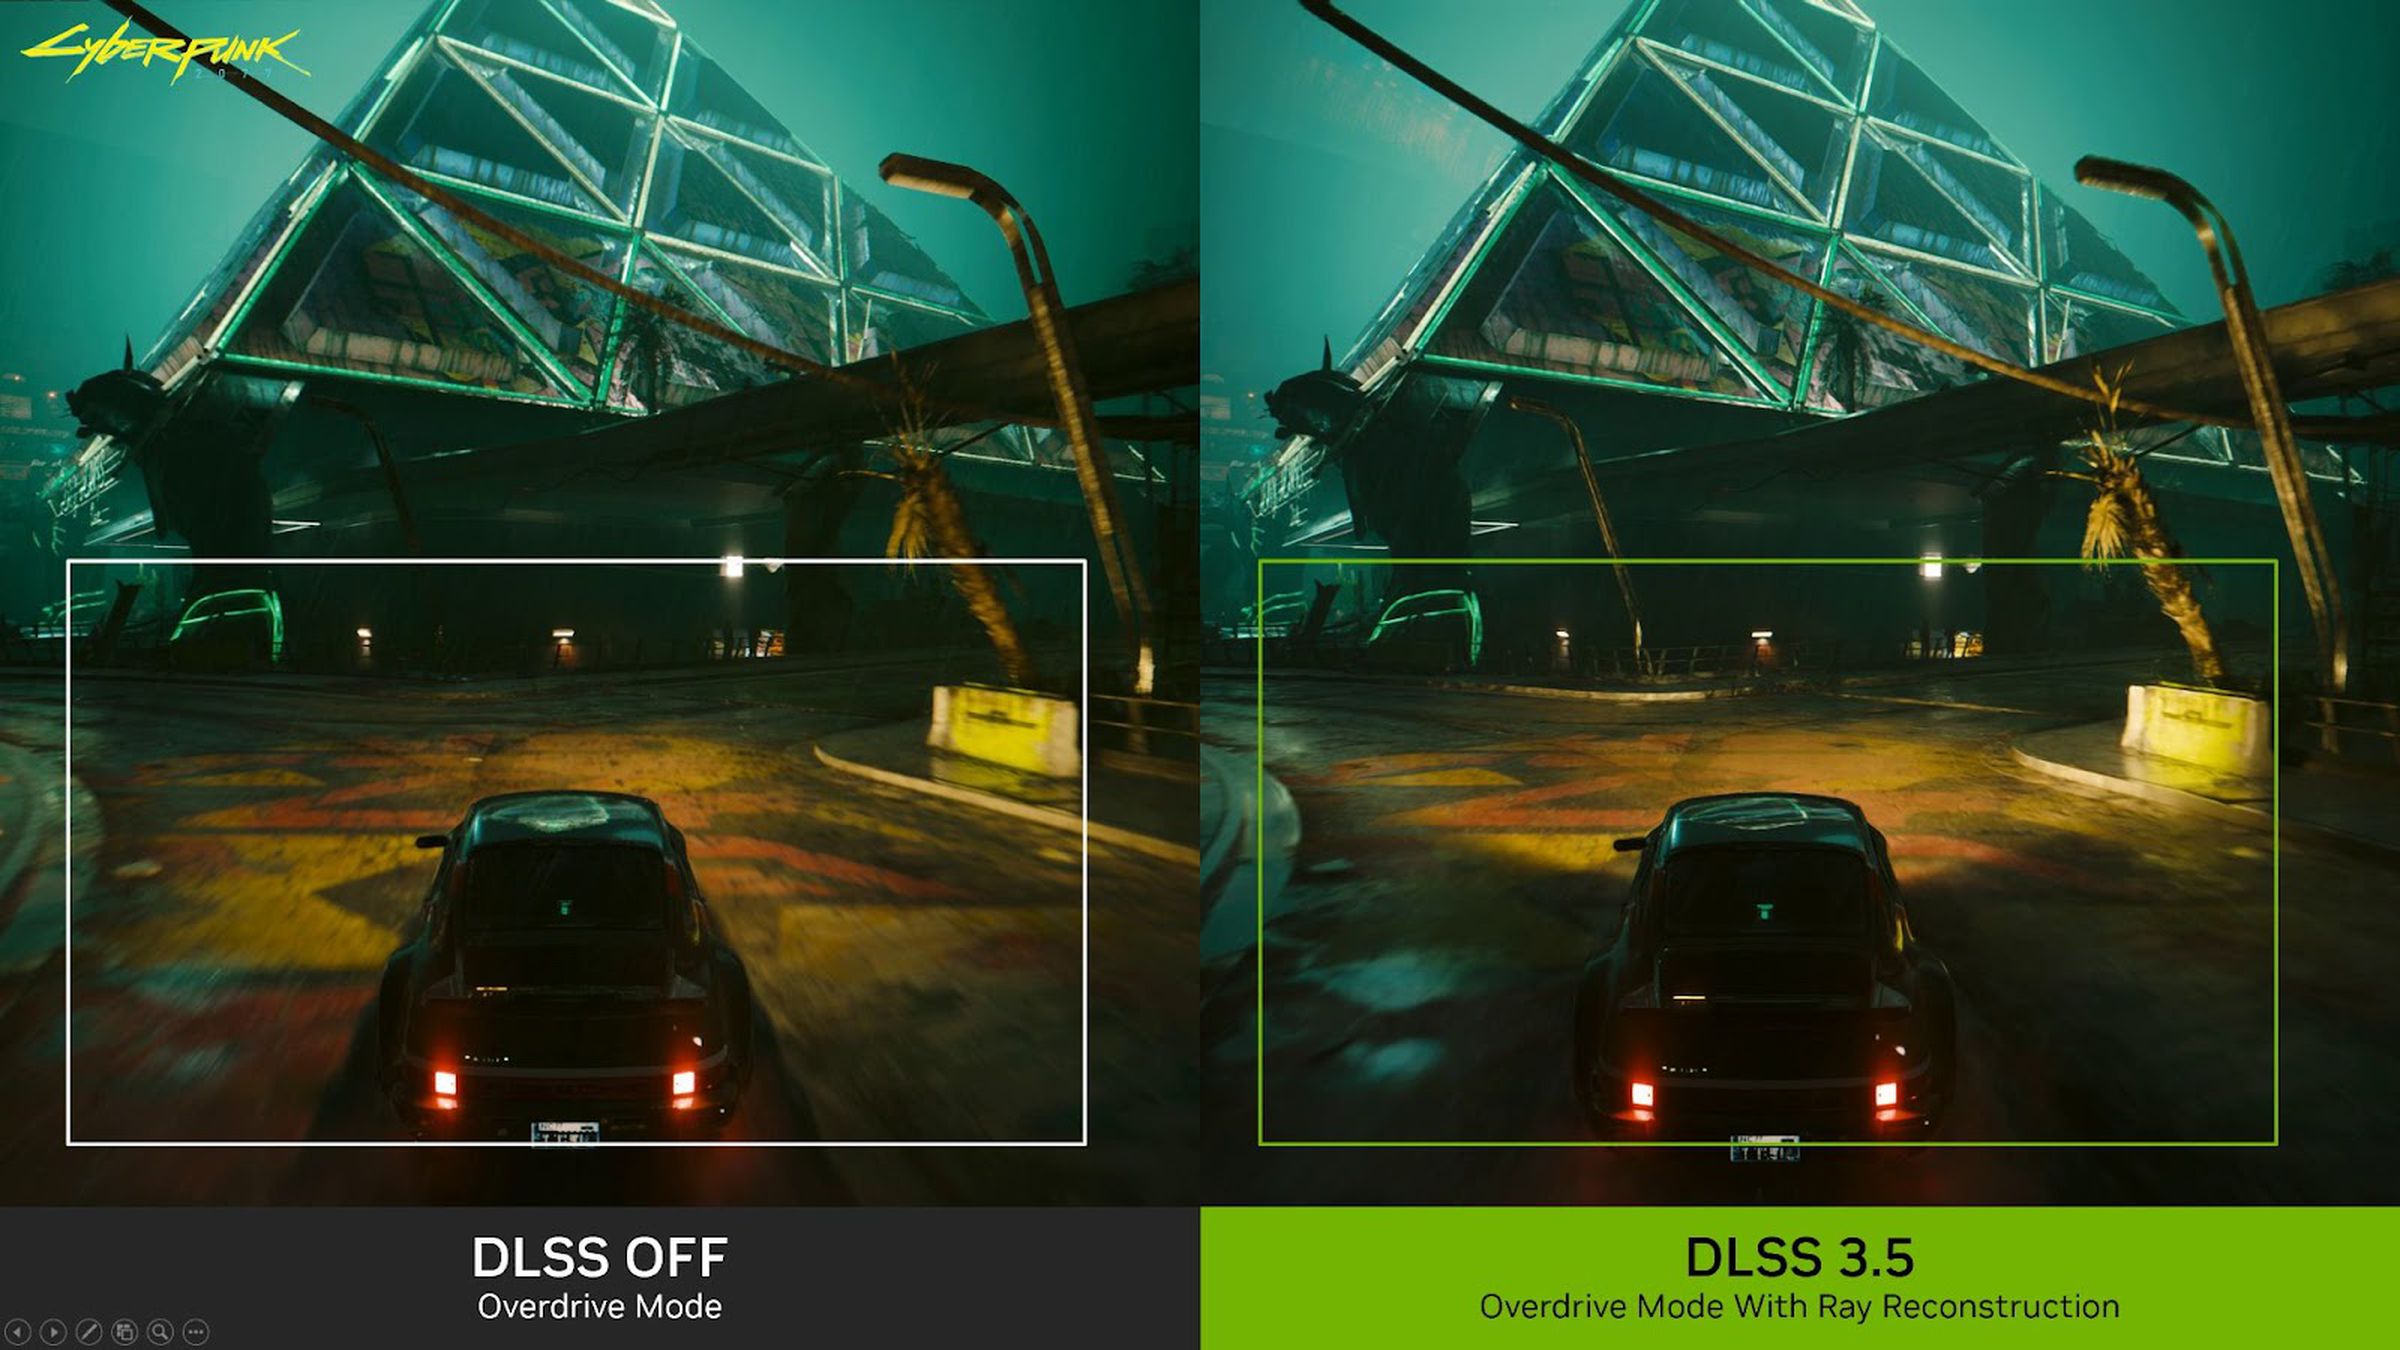 An image showing a comparison of Cyberpunk gameplay with DLSS 3.5 on and off